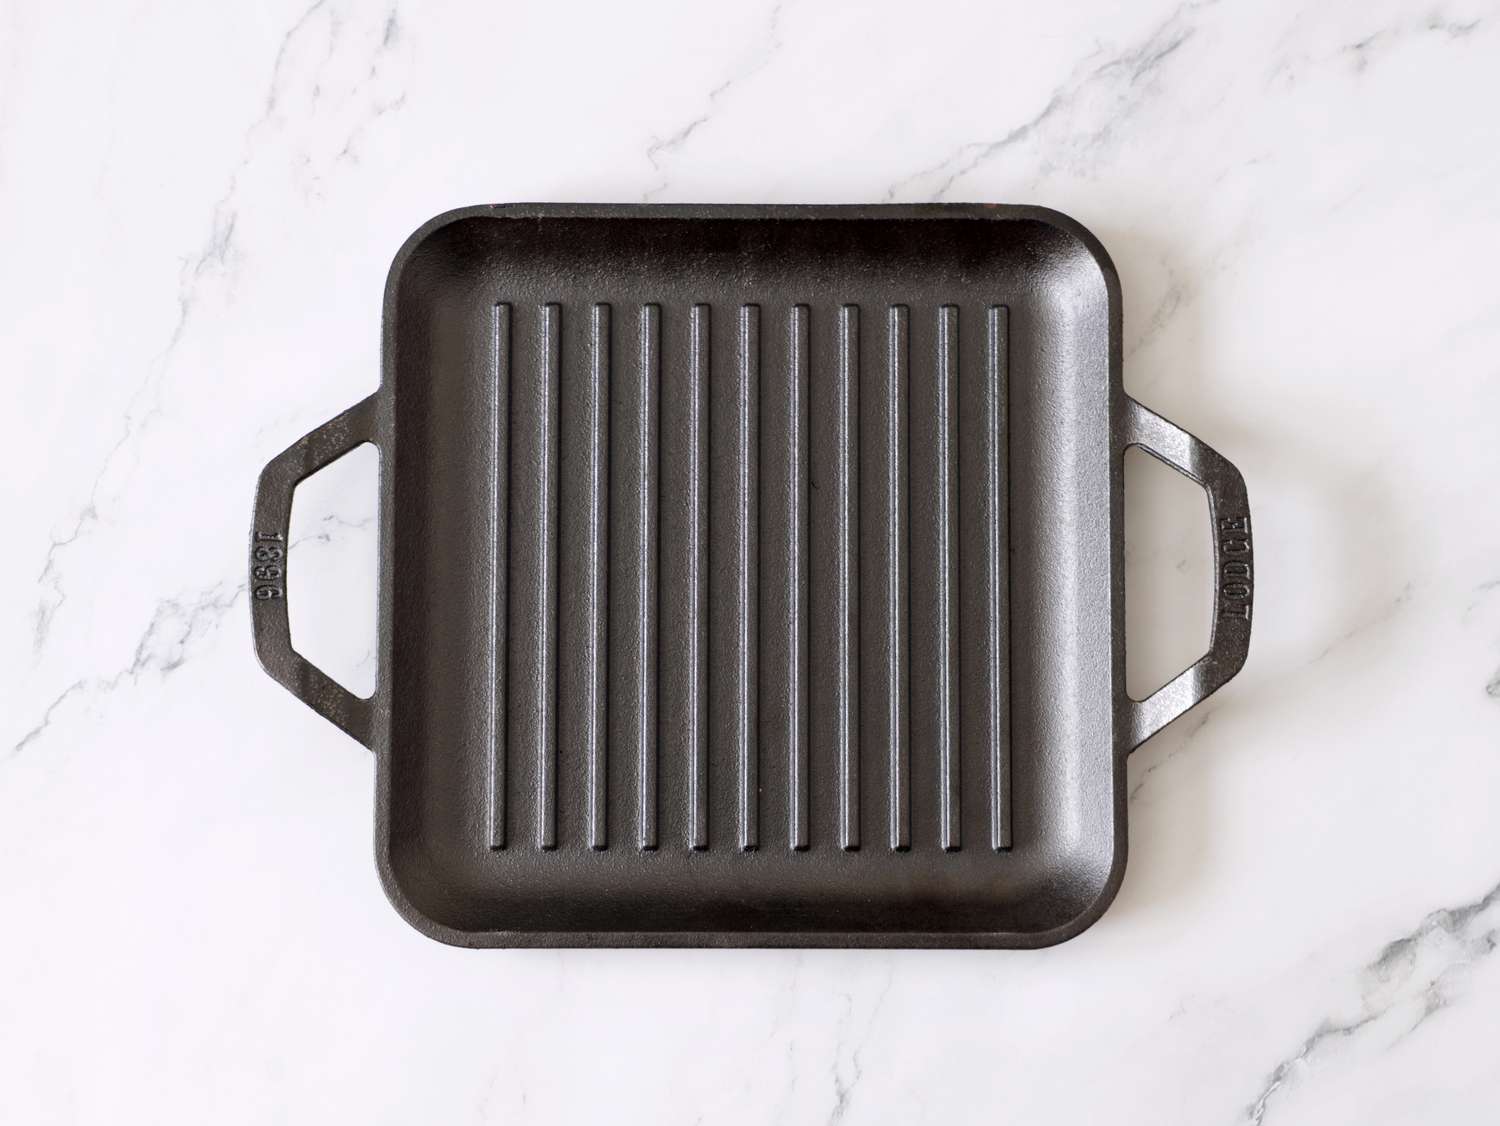 the lodge grill pan on a marble countertop